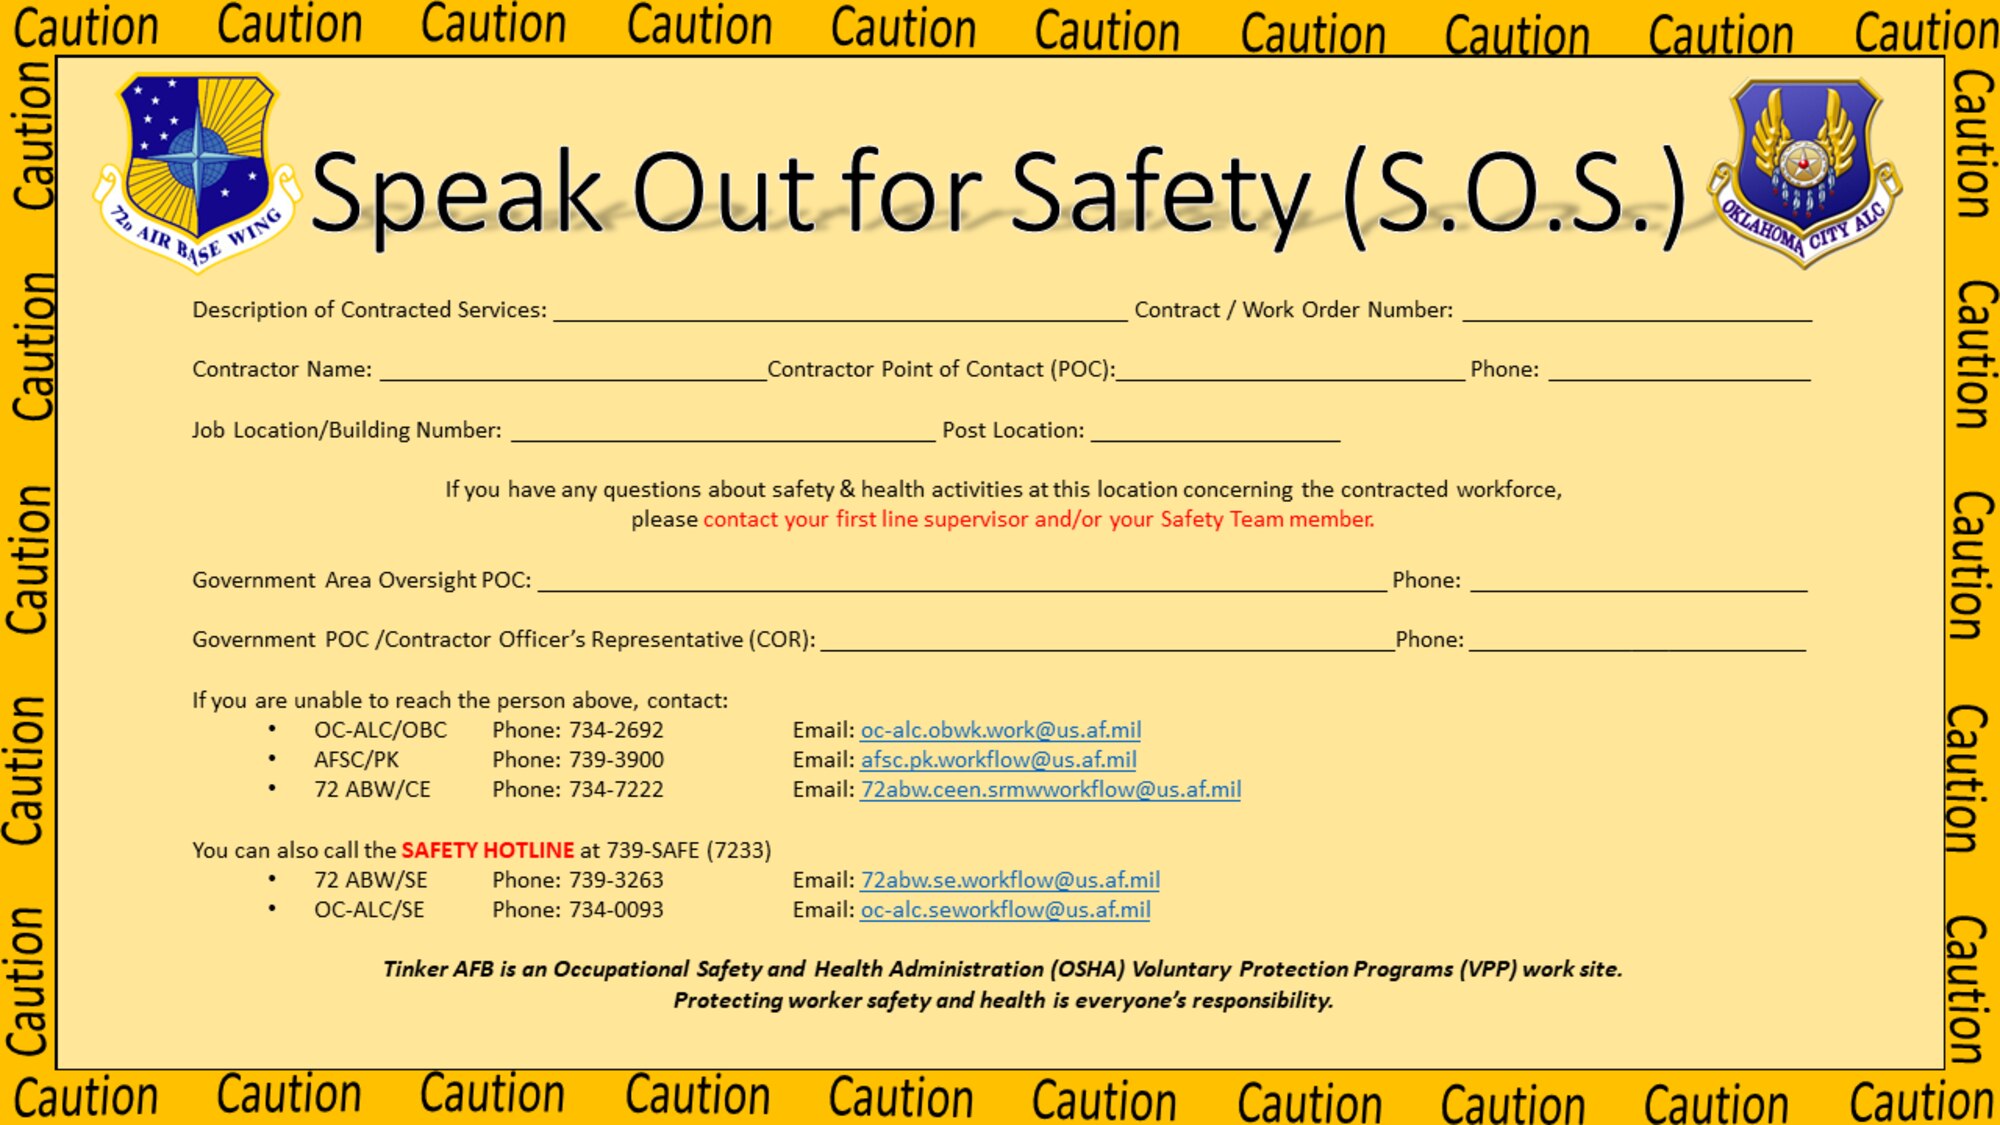 Example of Speak Out for Safety placard.